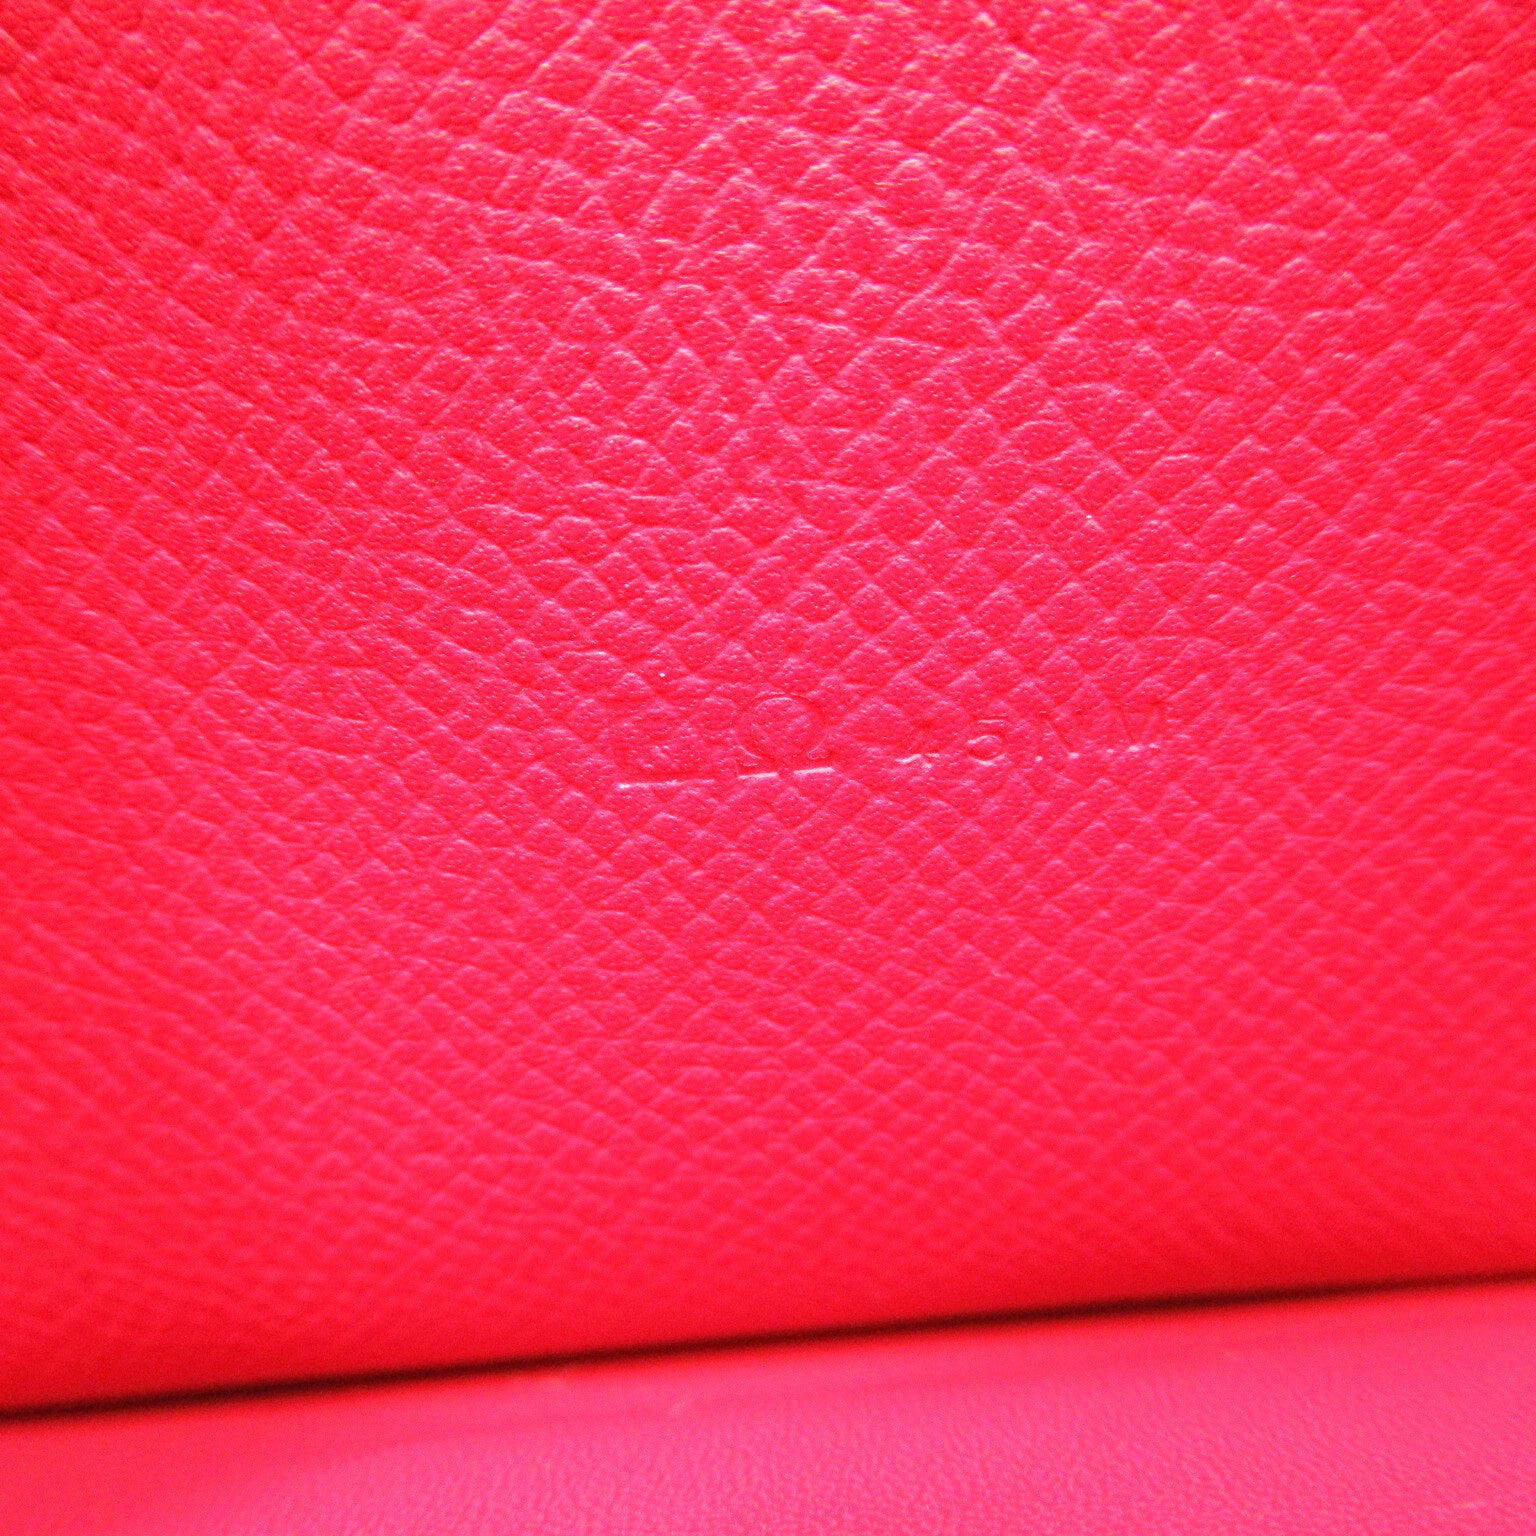 Hermes Hermes Constance Long Twin Fold Wallet Wallet Leather Epsom  Red